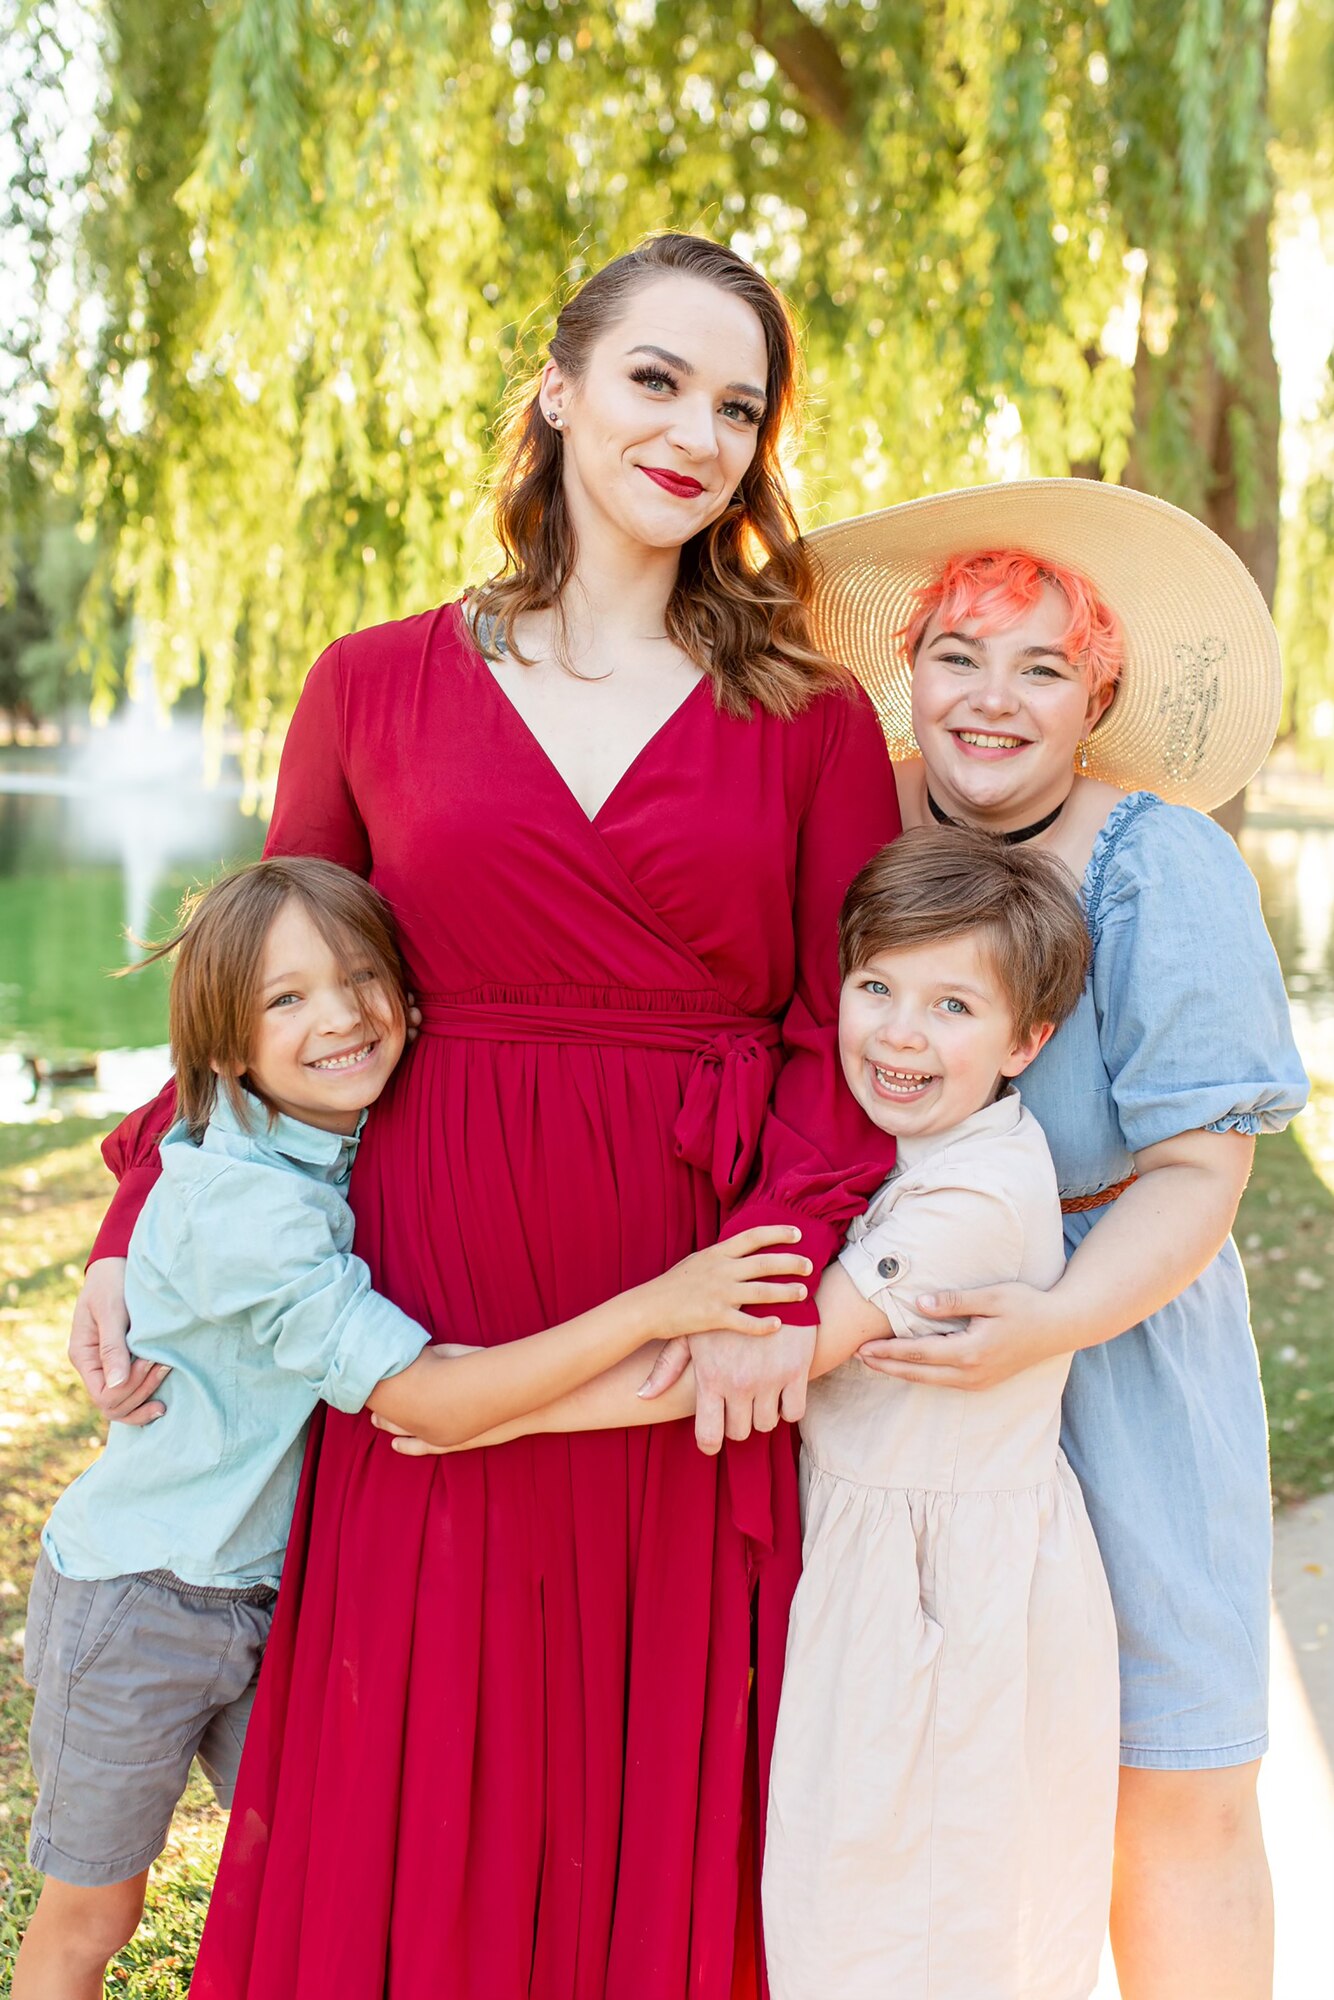 A woman in a red dress poses with her children for a family photo.